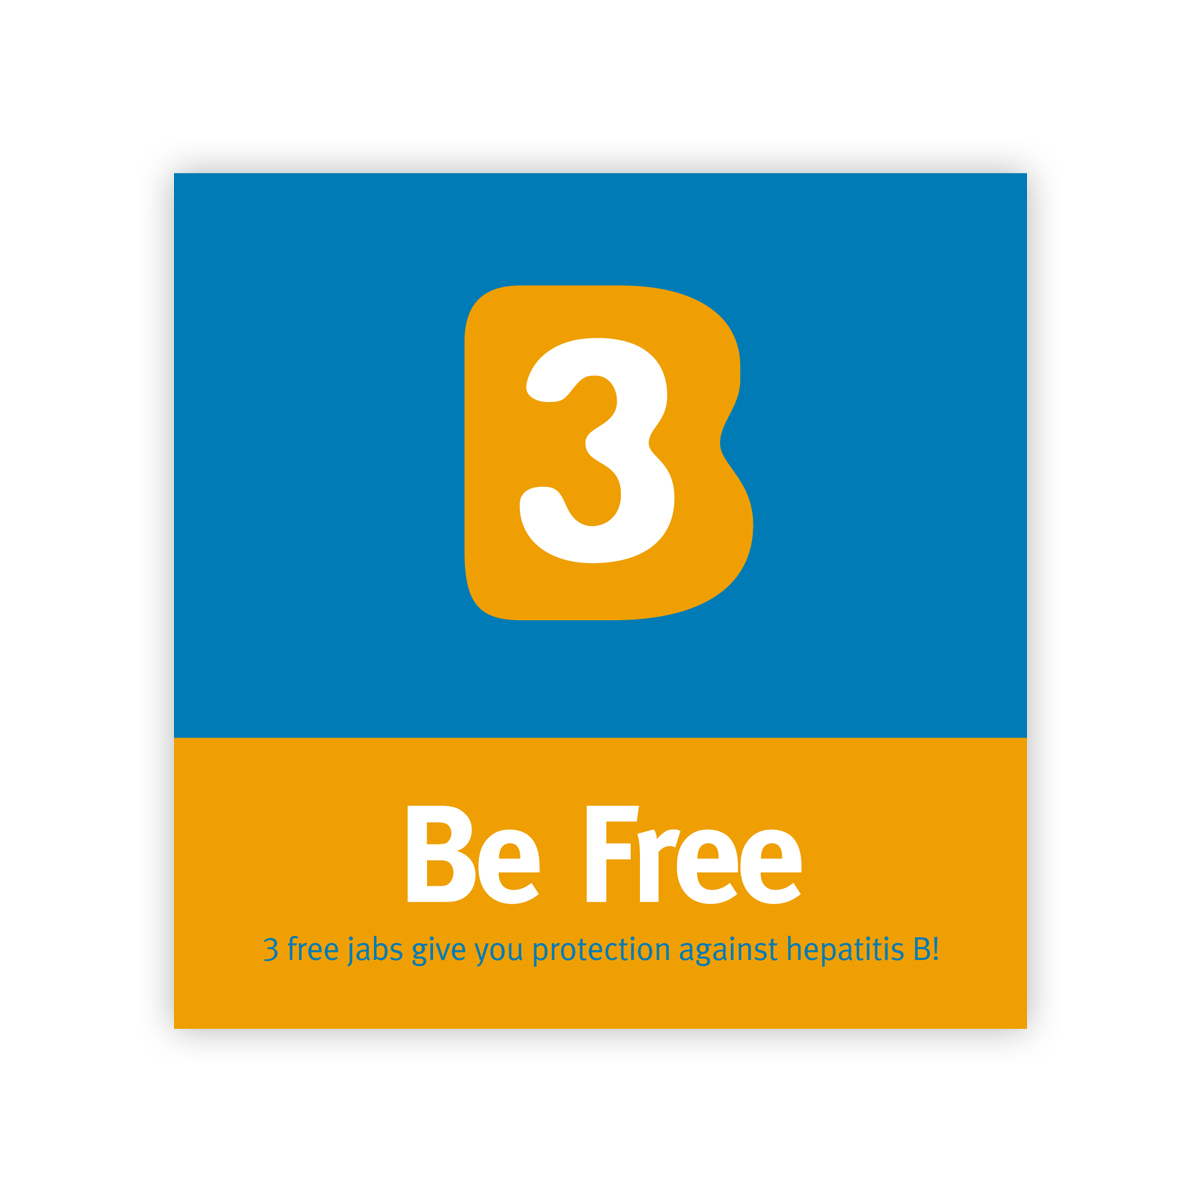 'B3 Be Free' campaign: Hep B vaccination leaflet